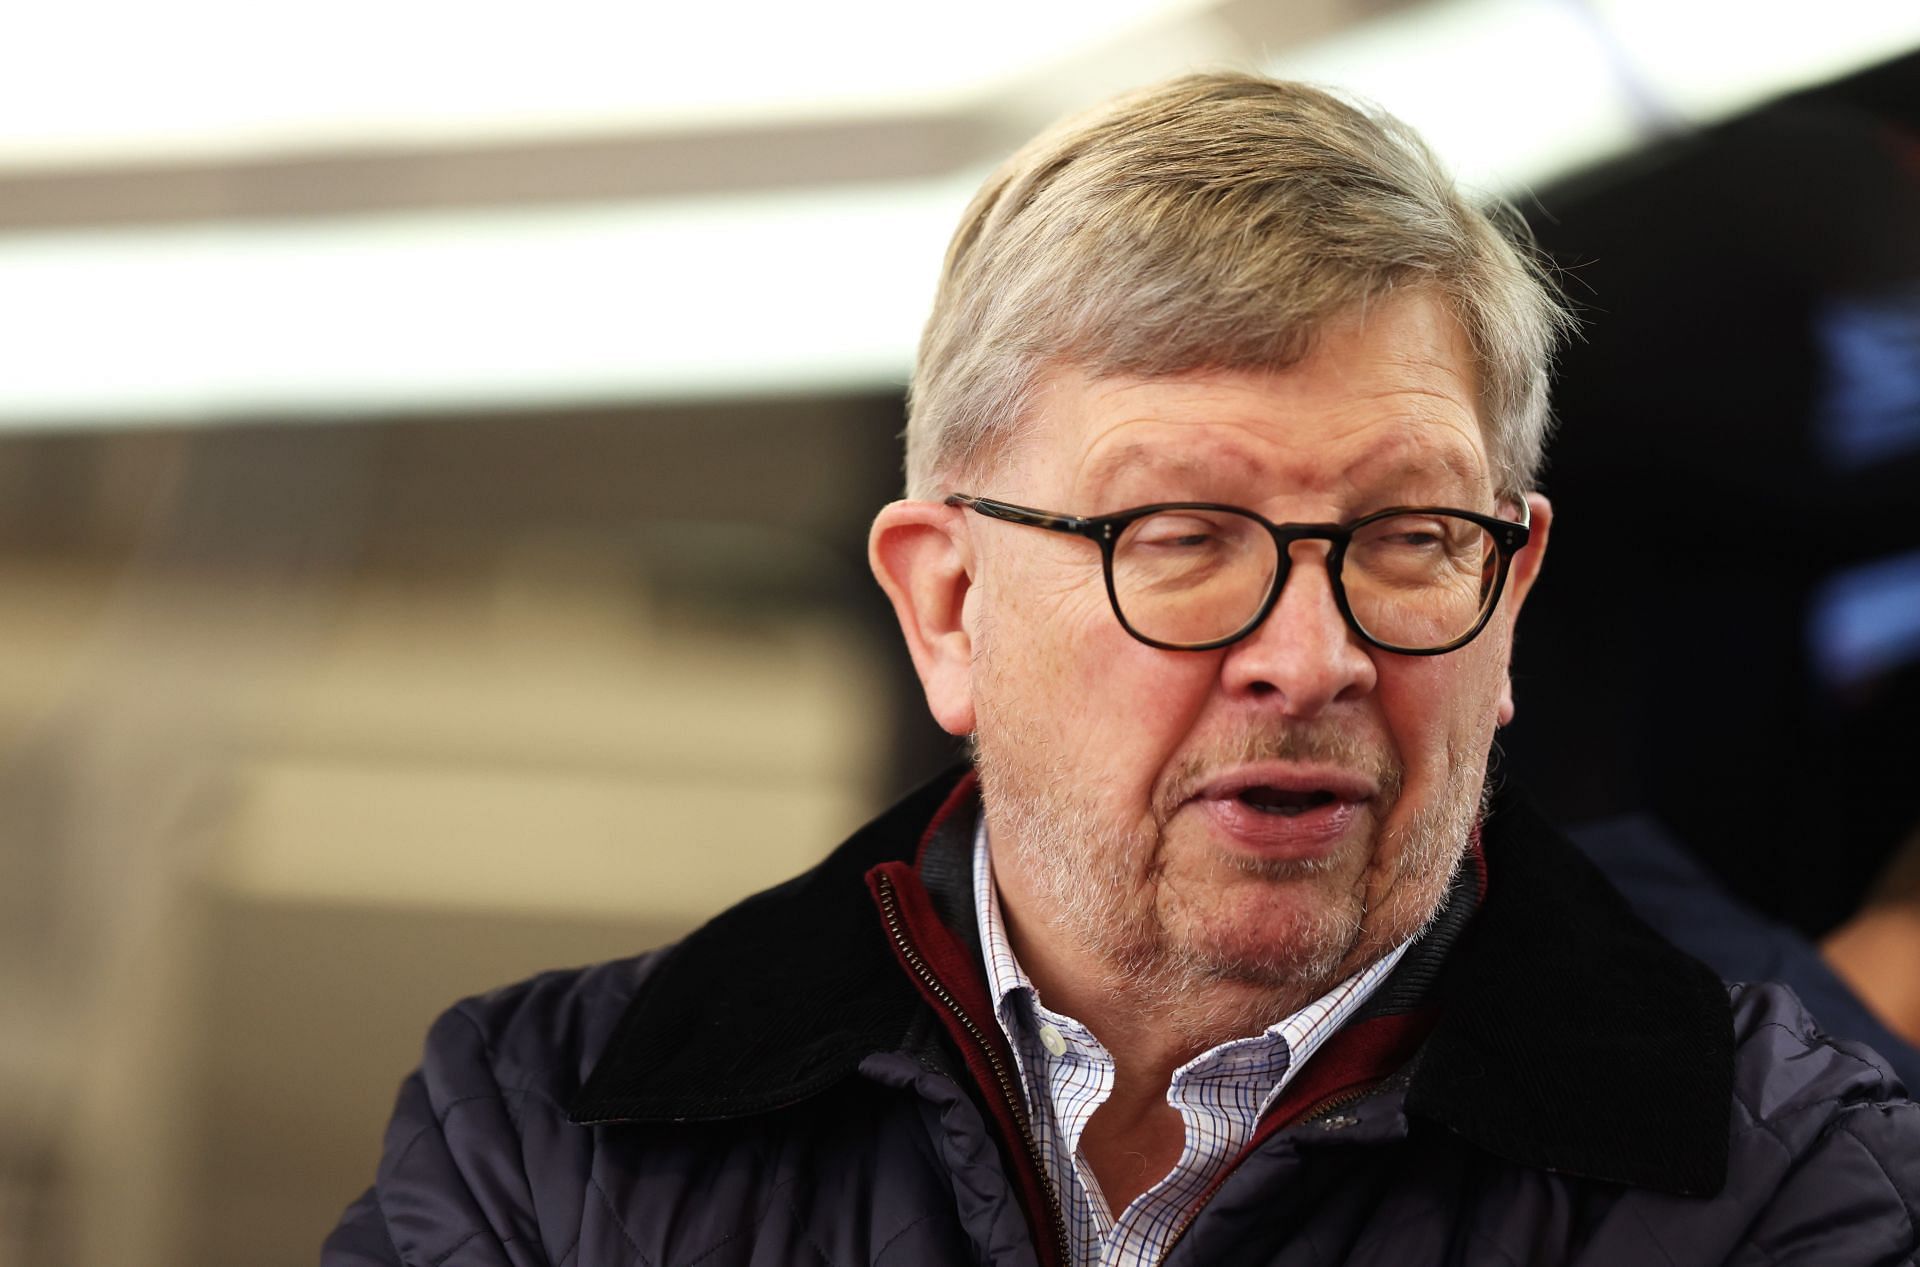 Ross Brawn during the first pre-season testing session of 2022 in Barcelona (Photo by Mark Thompson/Getty Images)